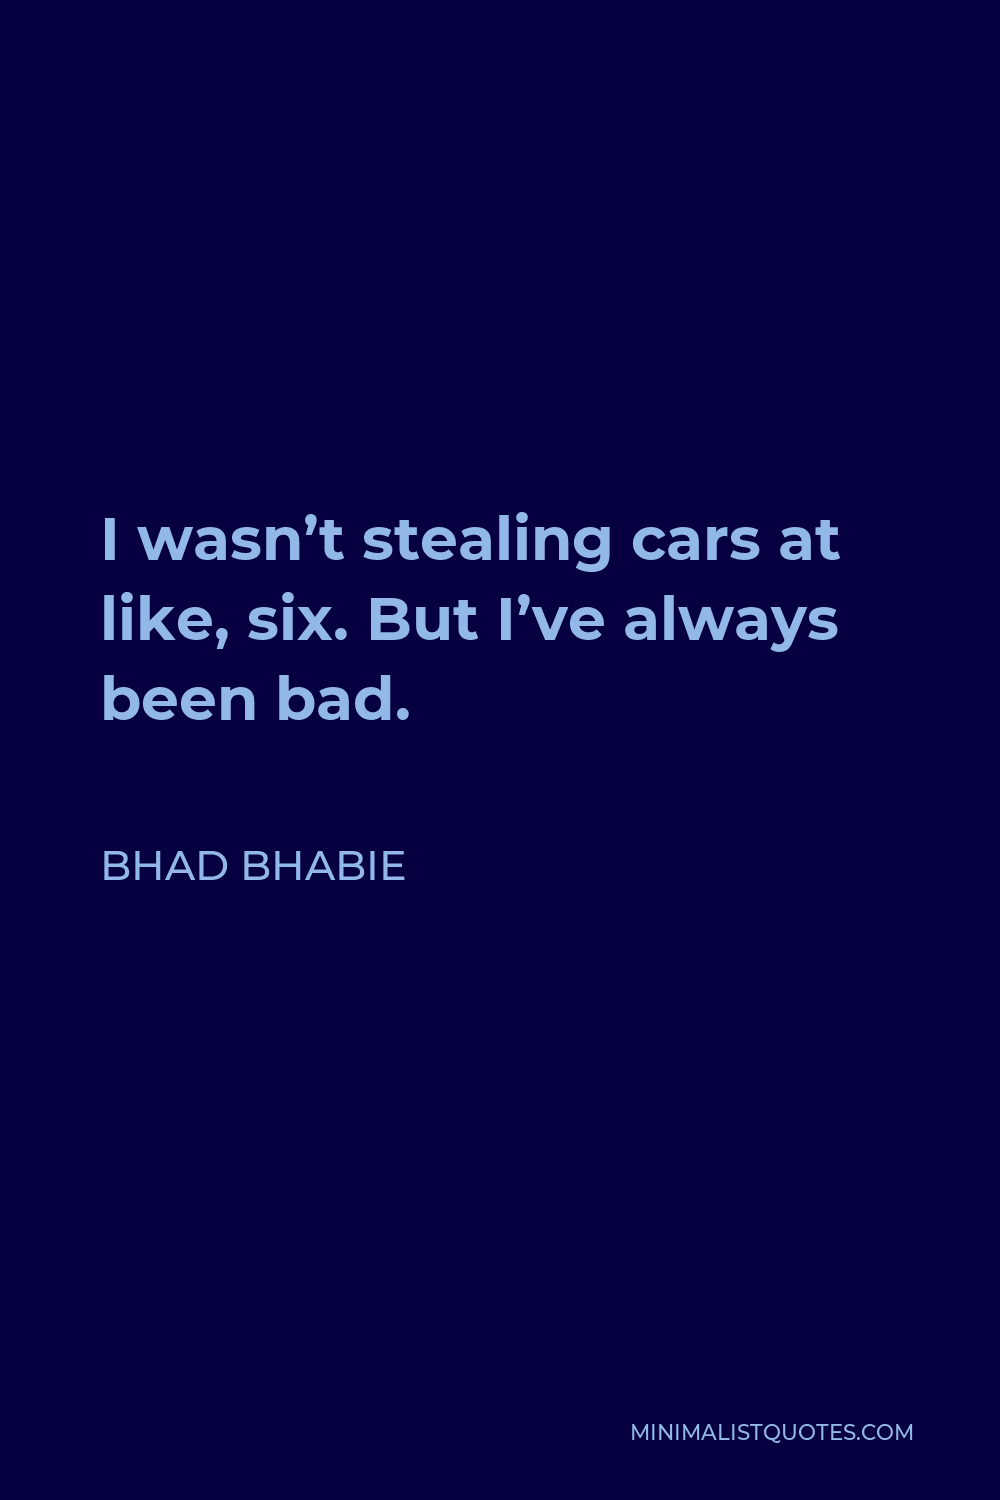 Bhad Bhabie Quote - I wasn’t stealing cars at like, six. But I’ve always been bad.